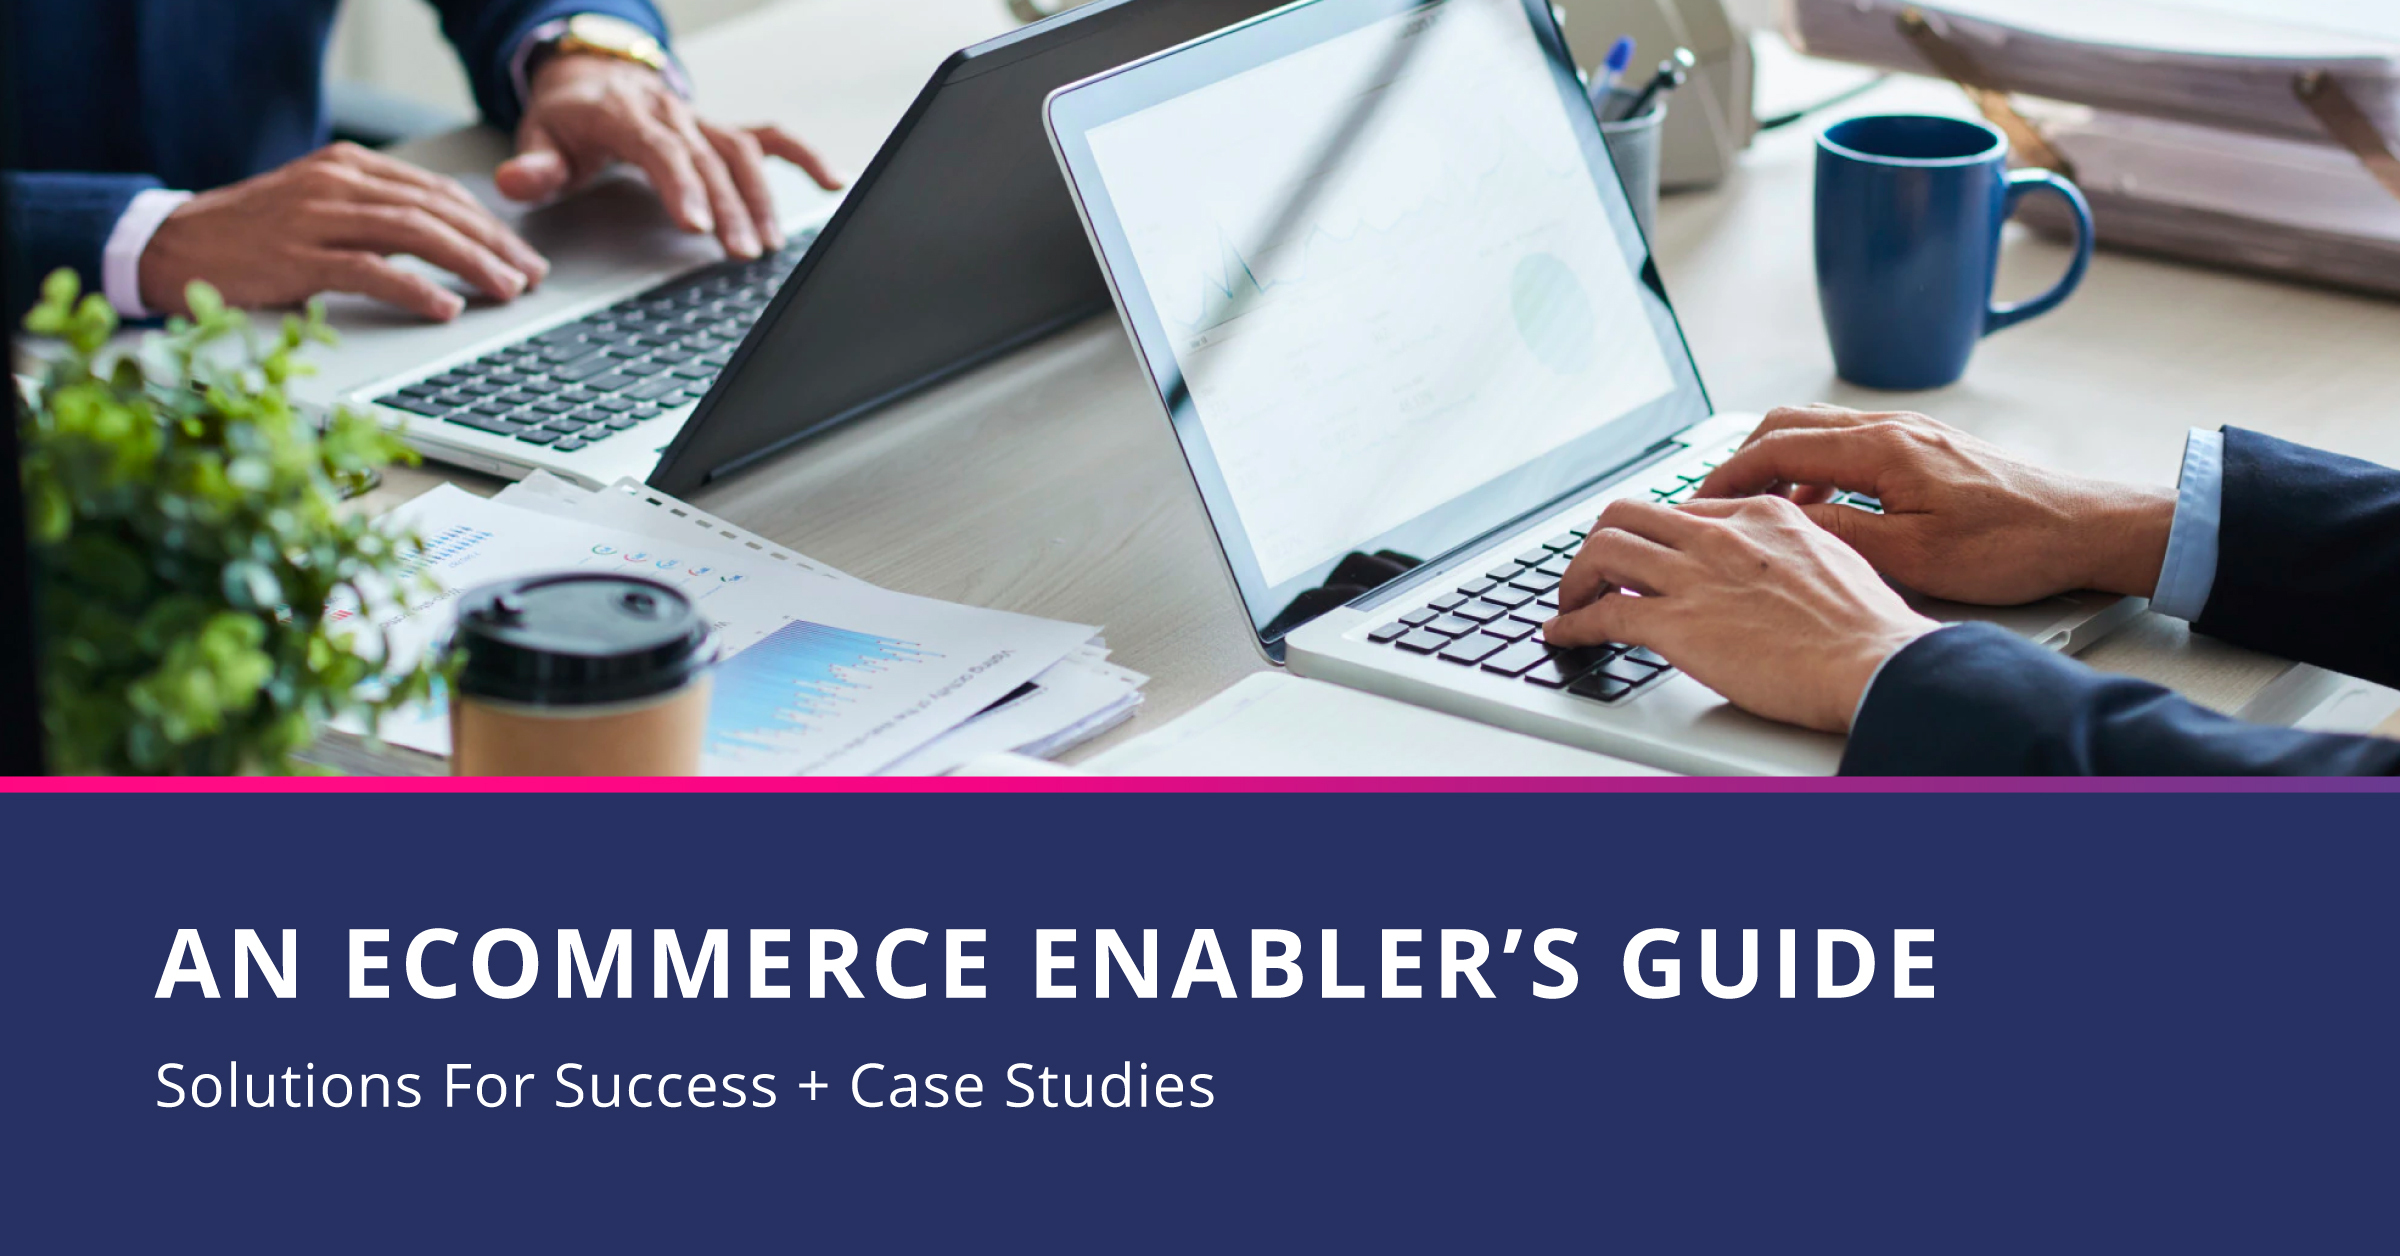 Tips for eCommerce enablers to overcome warehouse, inventory, and order management challenges. The best technology solutions and examples of other eCommerce enablers' success. 